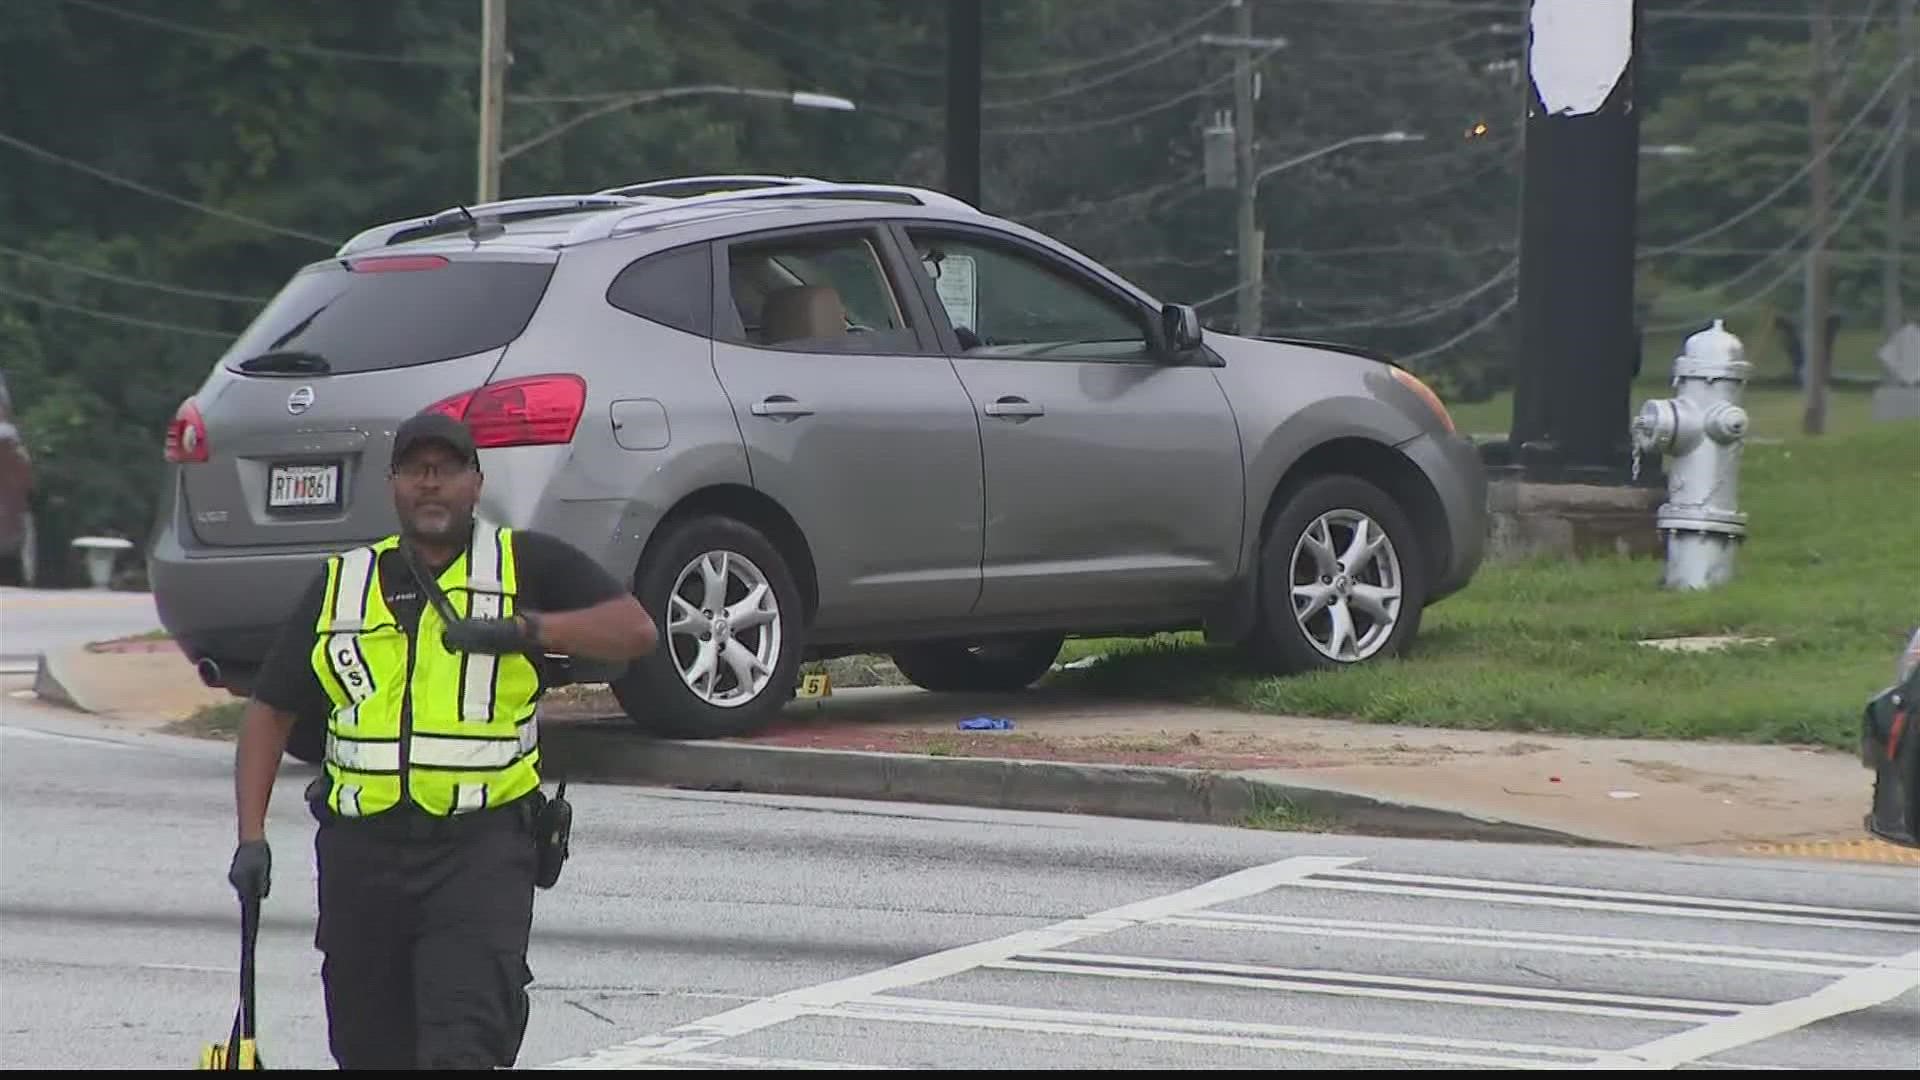 DeKalb County Police are investigating after a driver who was shot several times crashed into a telephone pole in Redan, they said.